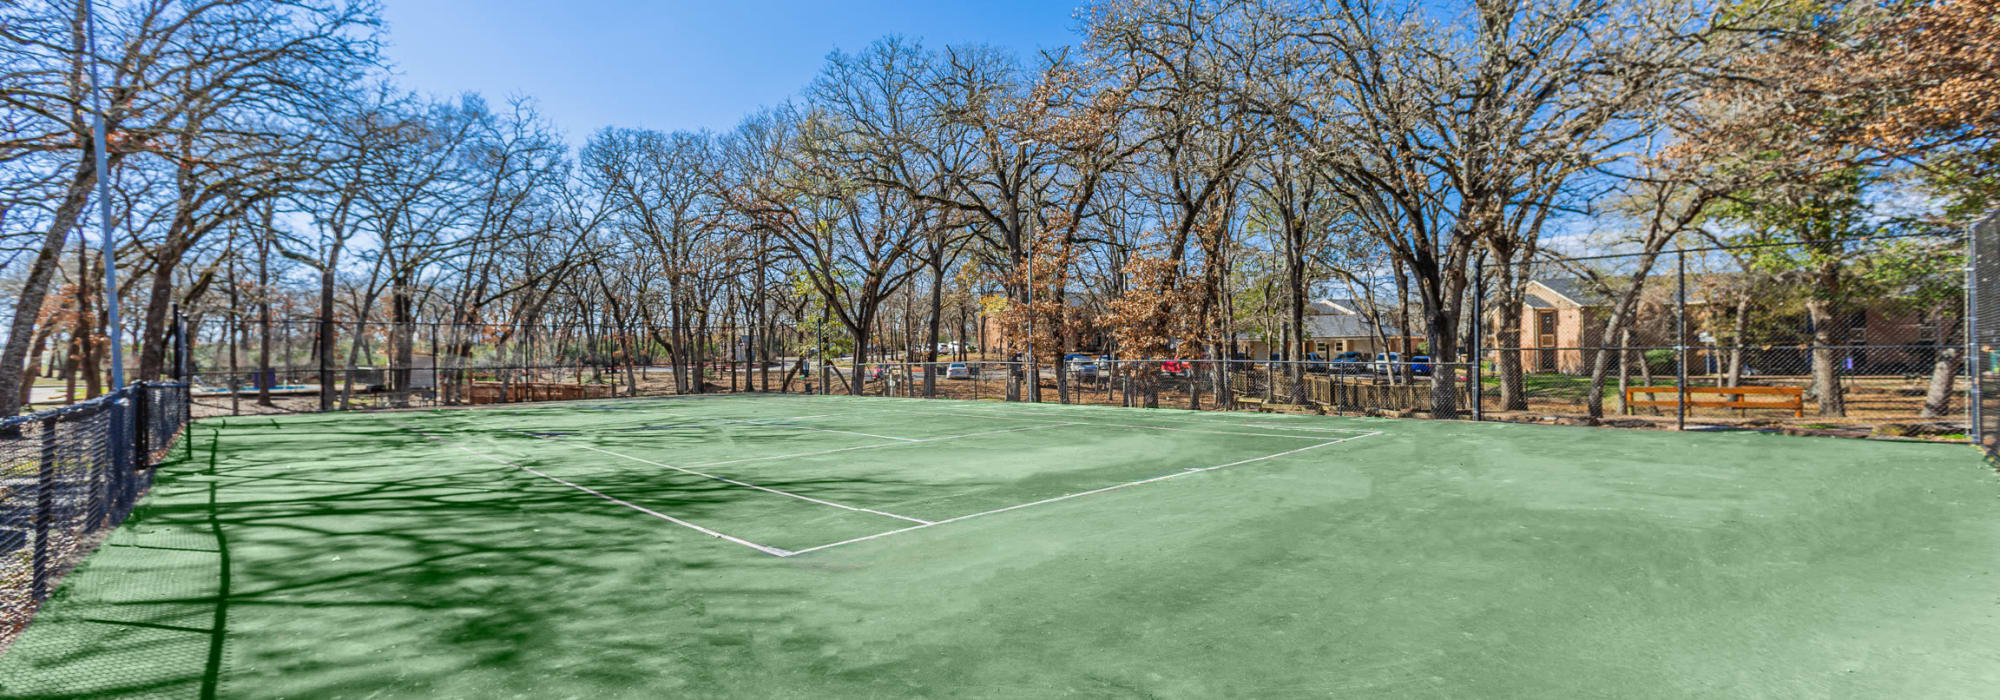 Tennis courts at Retreat at 2818 in Bryan, Texas